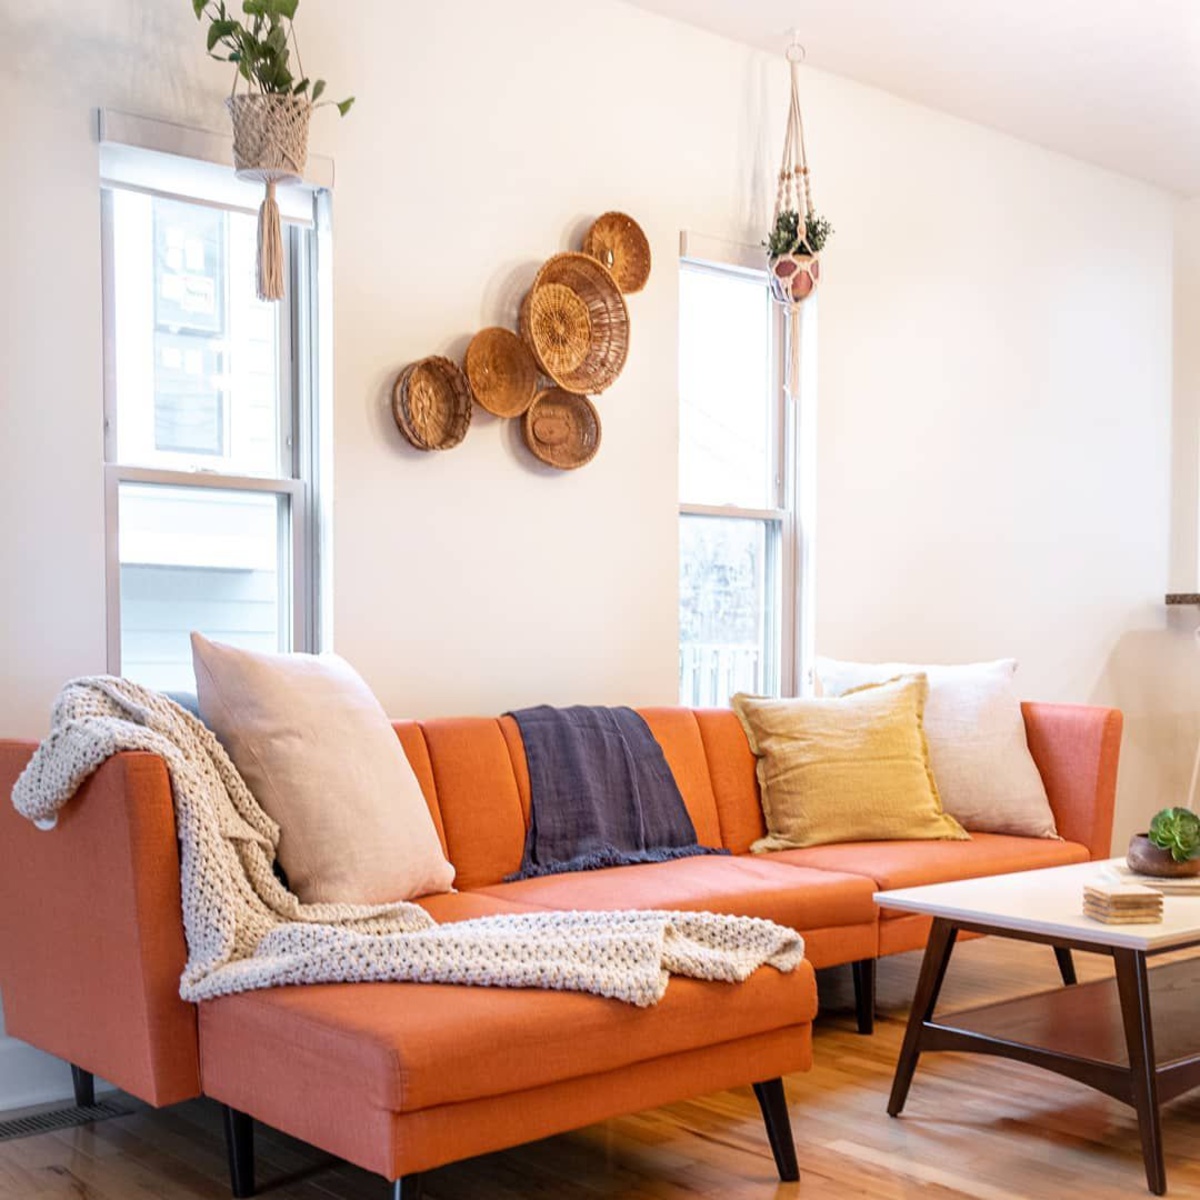 Home Decor What Colors Go With Orange